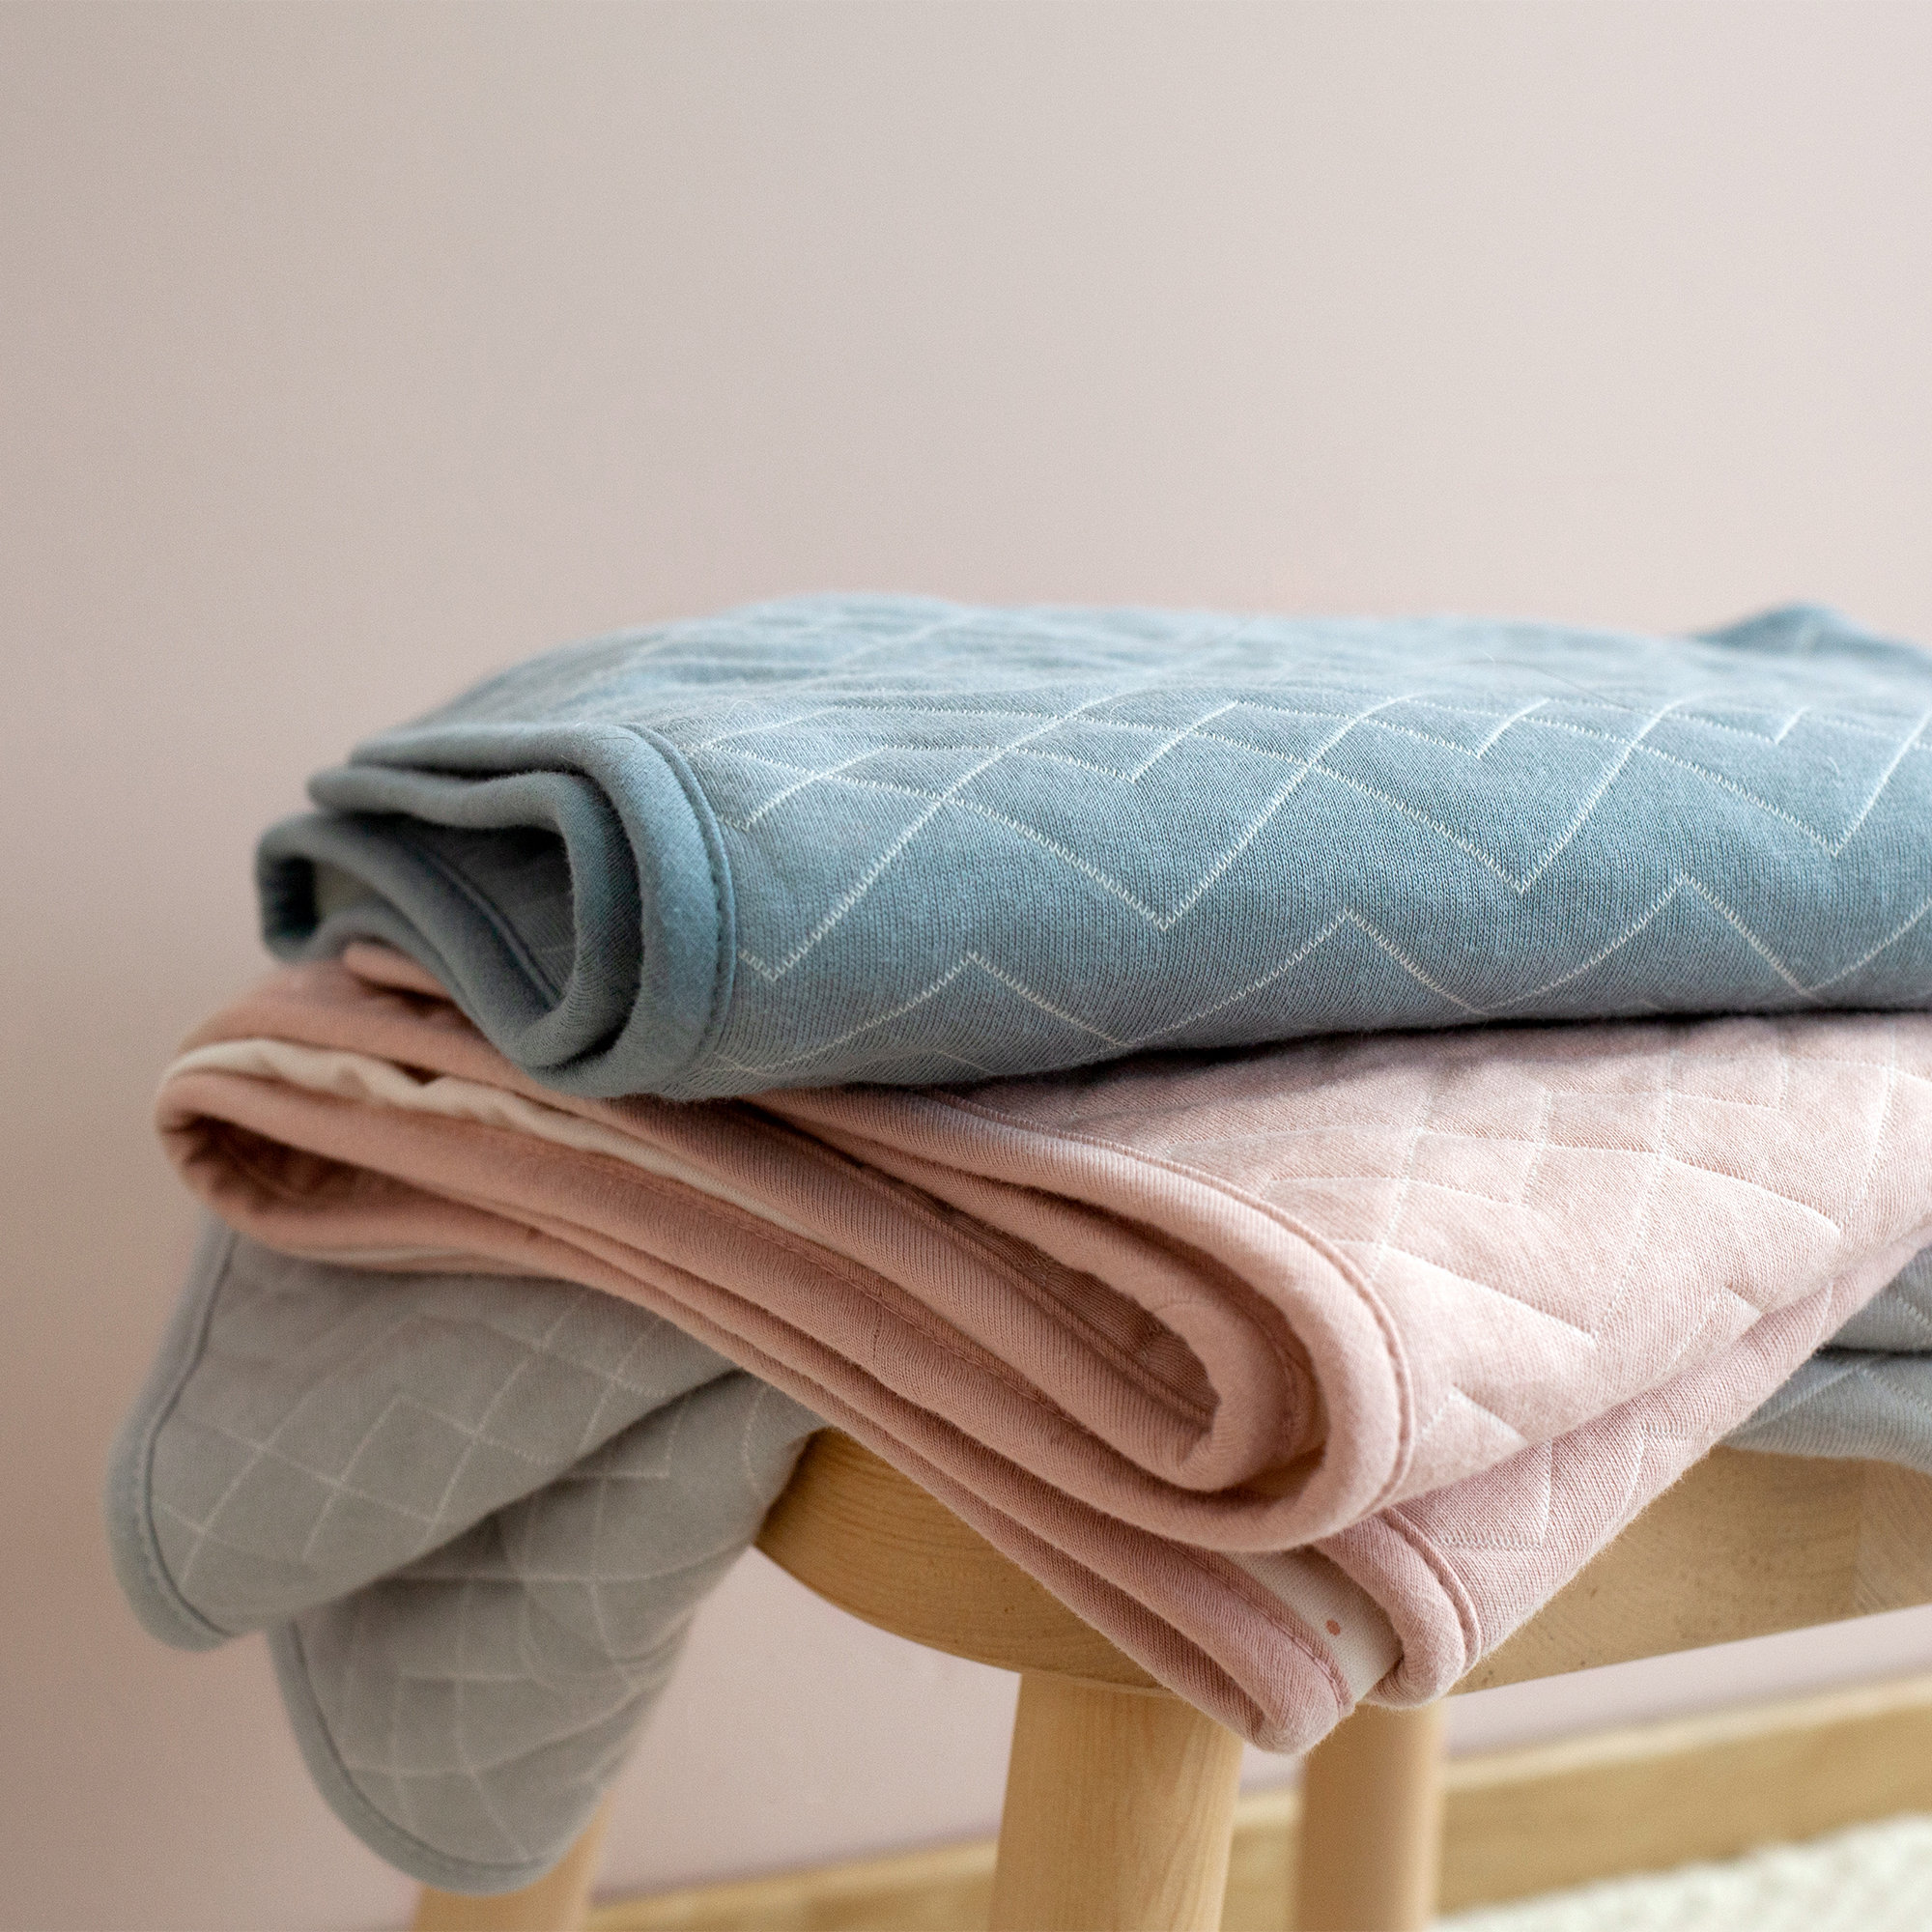 Couverture Quilted jersey + jersey 75x100cm OSAKA Blush tog 1.5[BEDDING]